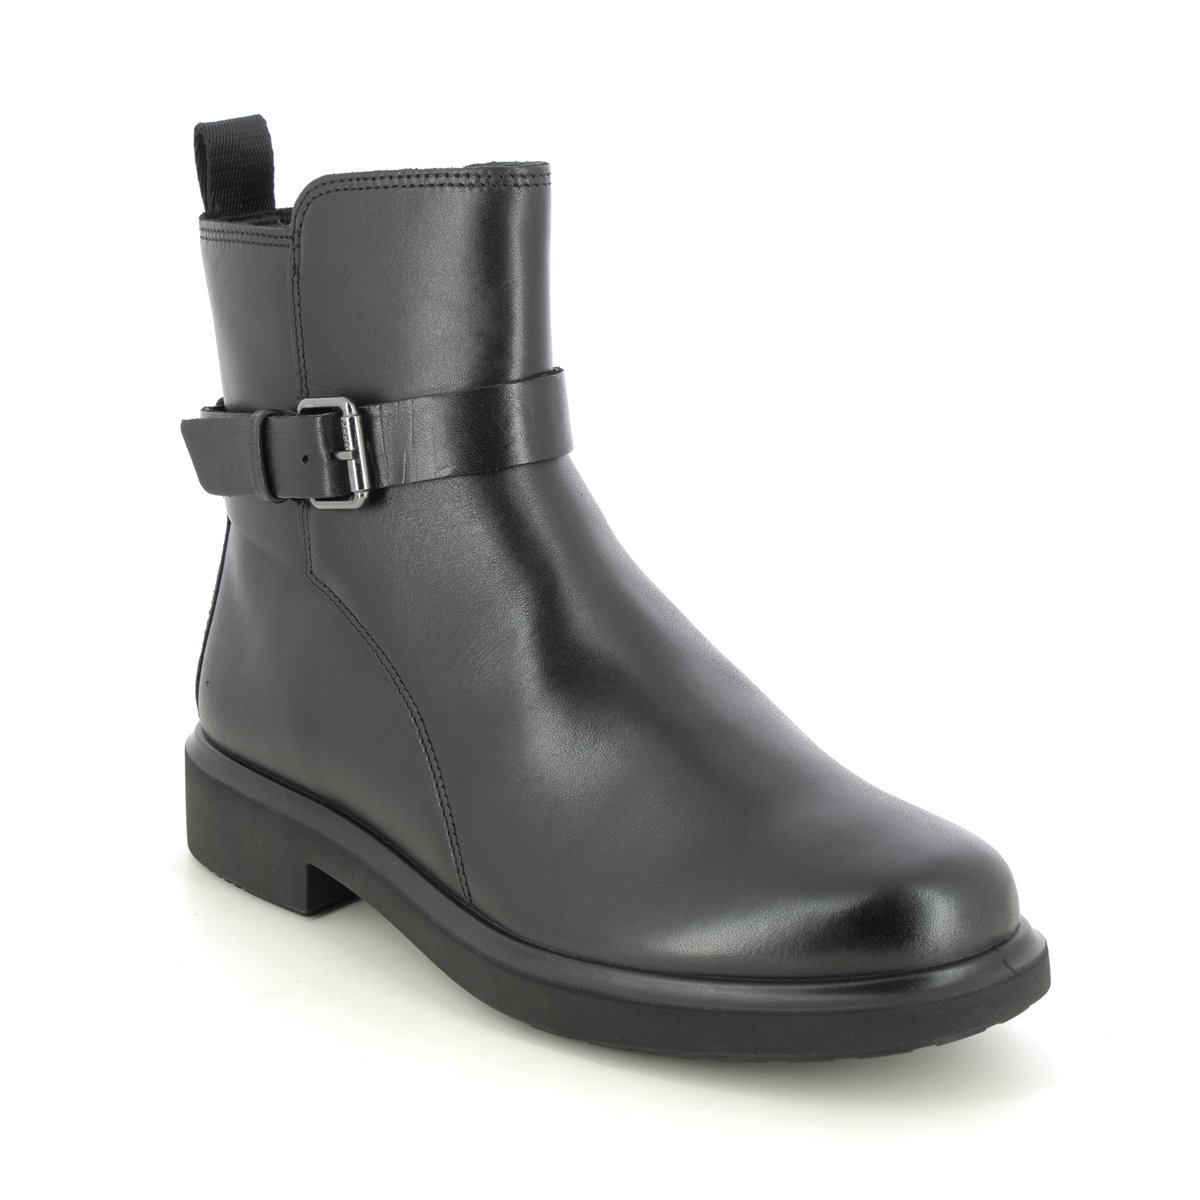 Ecco Amsterdam Tex Metropole Black Leather Womens Ankle Boots 222013-01001 In Size 42 In Plain Black Leather